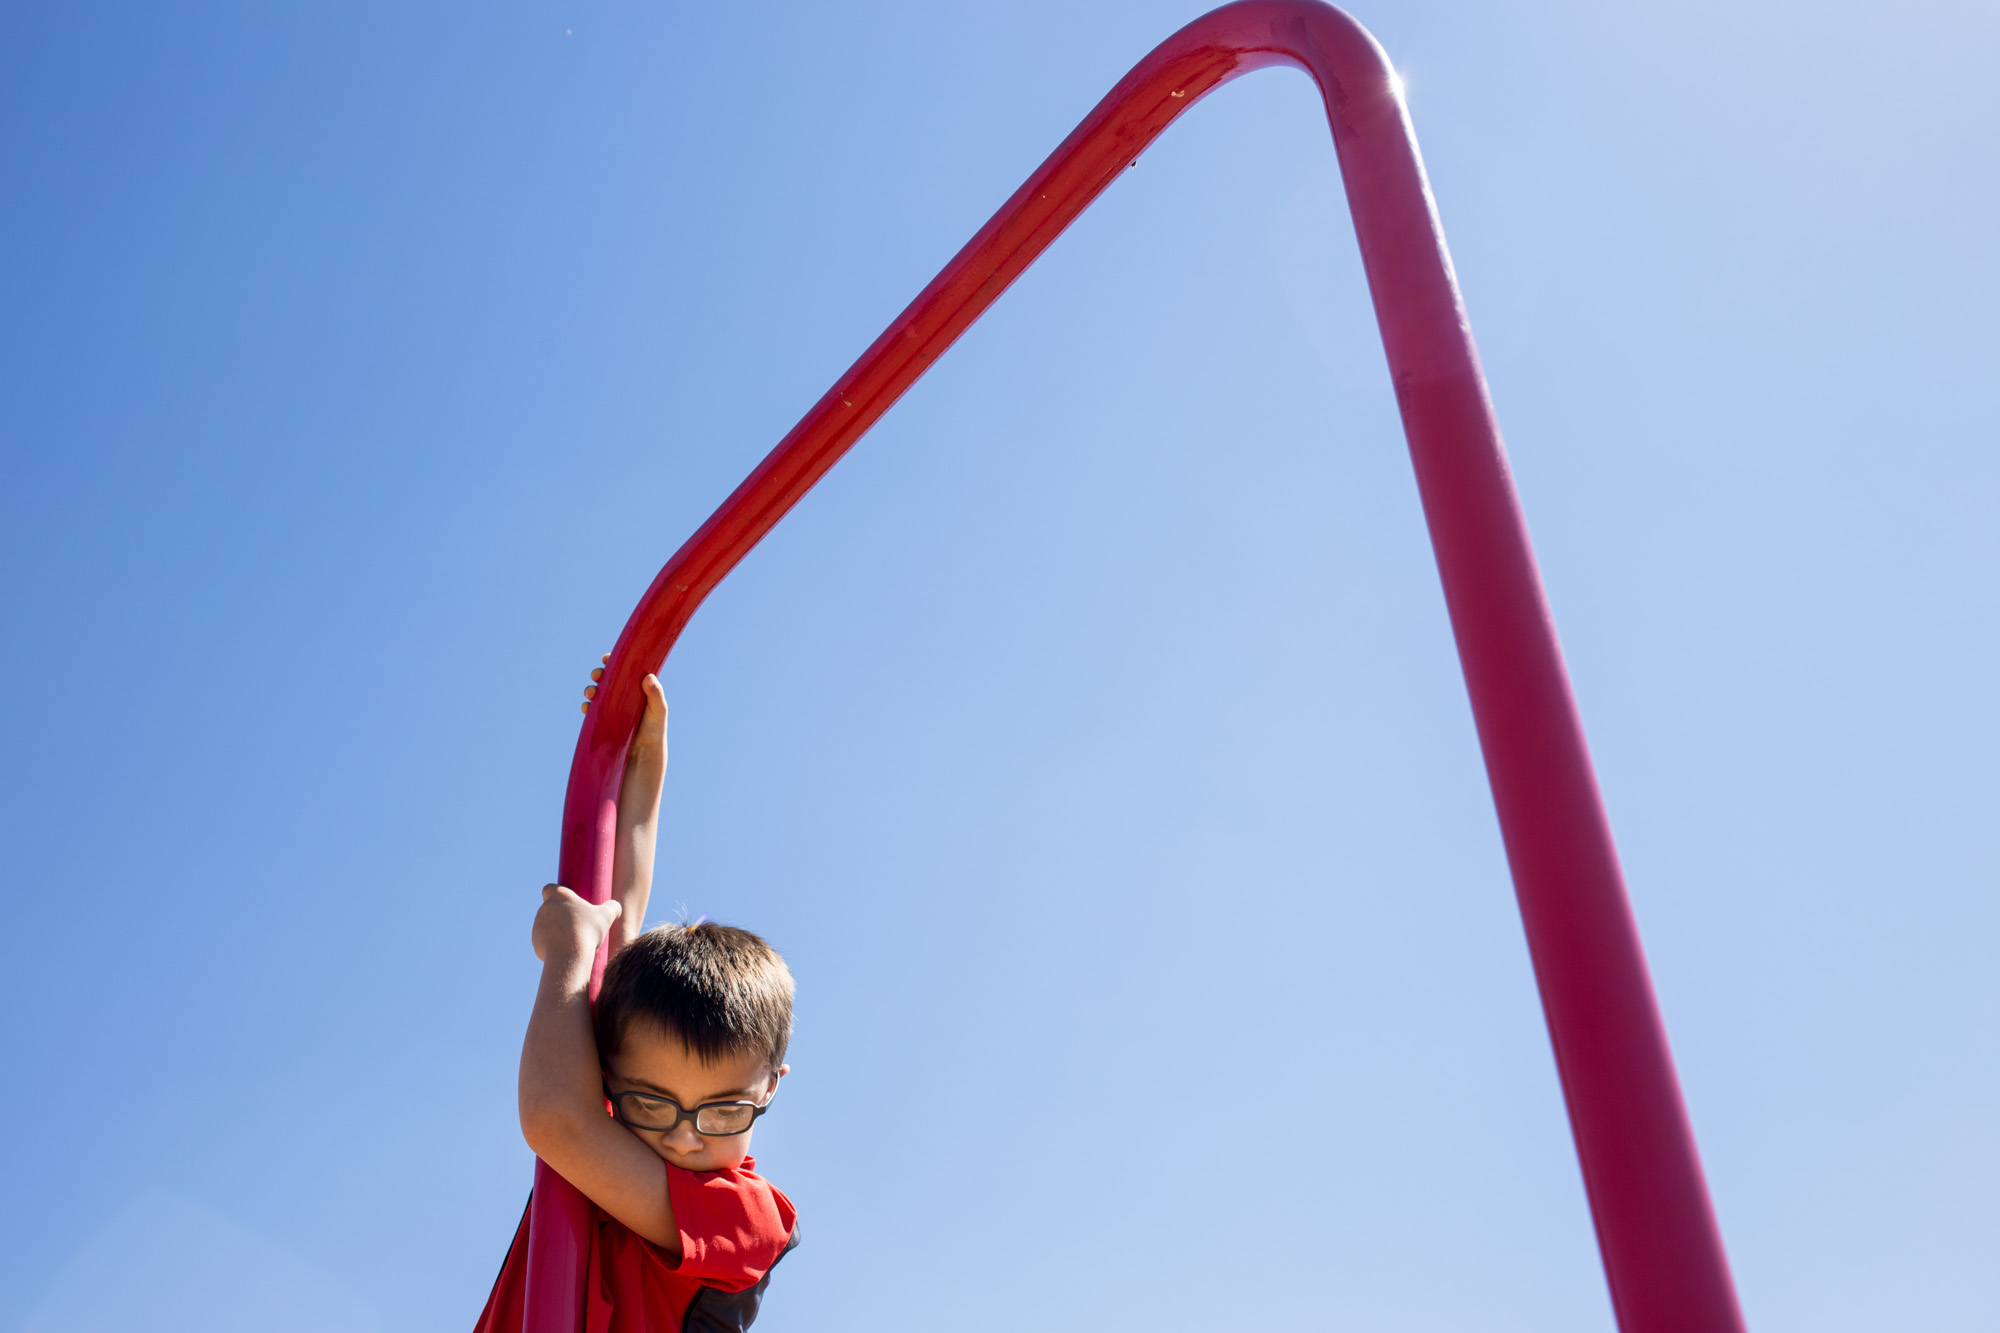  Treven hangs from the monkey bars on the playground at Perryville Elementary during recess on Wednesday. Because he has Down’s syndrome, Treven is developmentally behind other kids his age. 